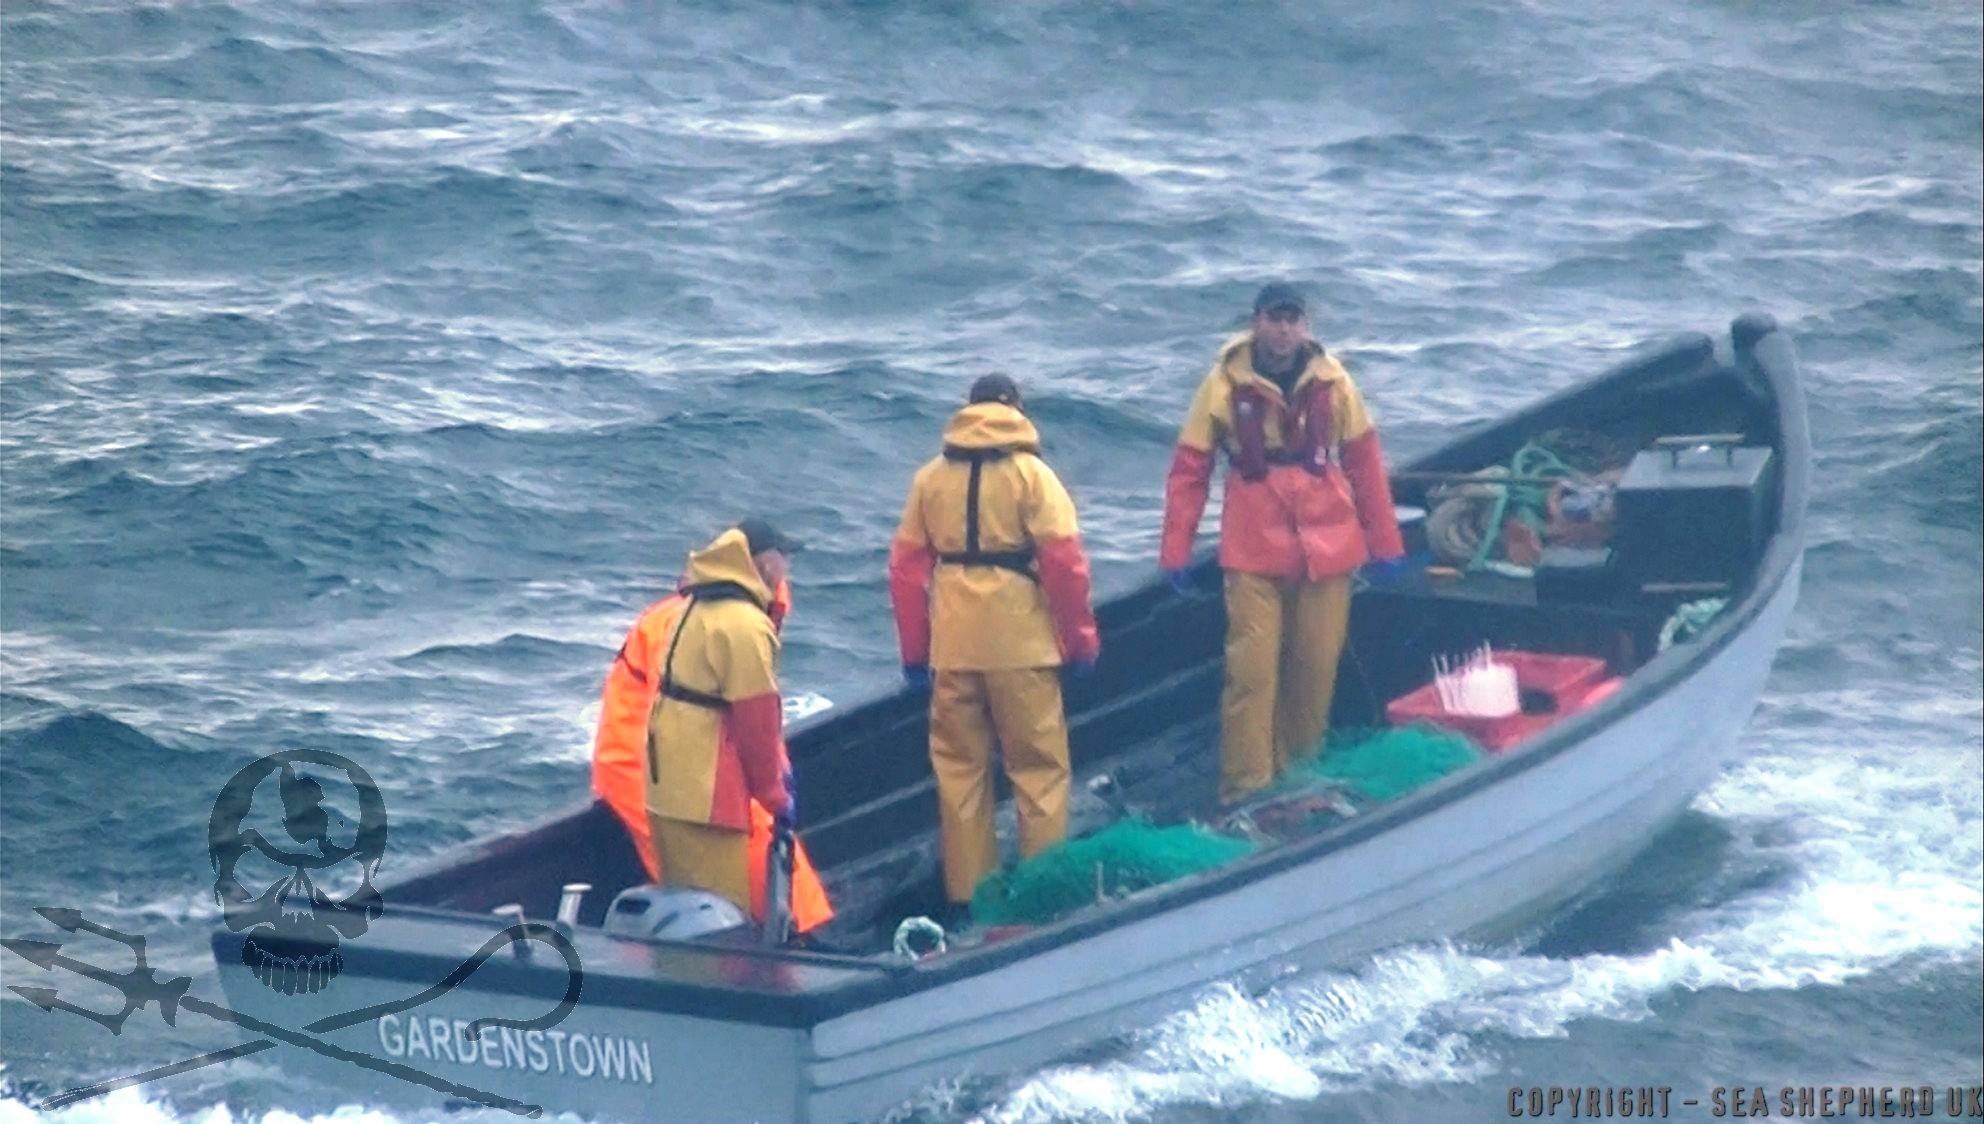 Image released by Sea Shepherd of marksmen targeting seals off the north-east coast